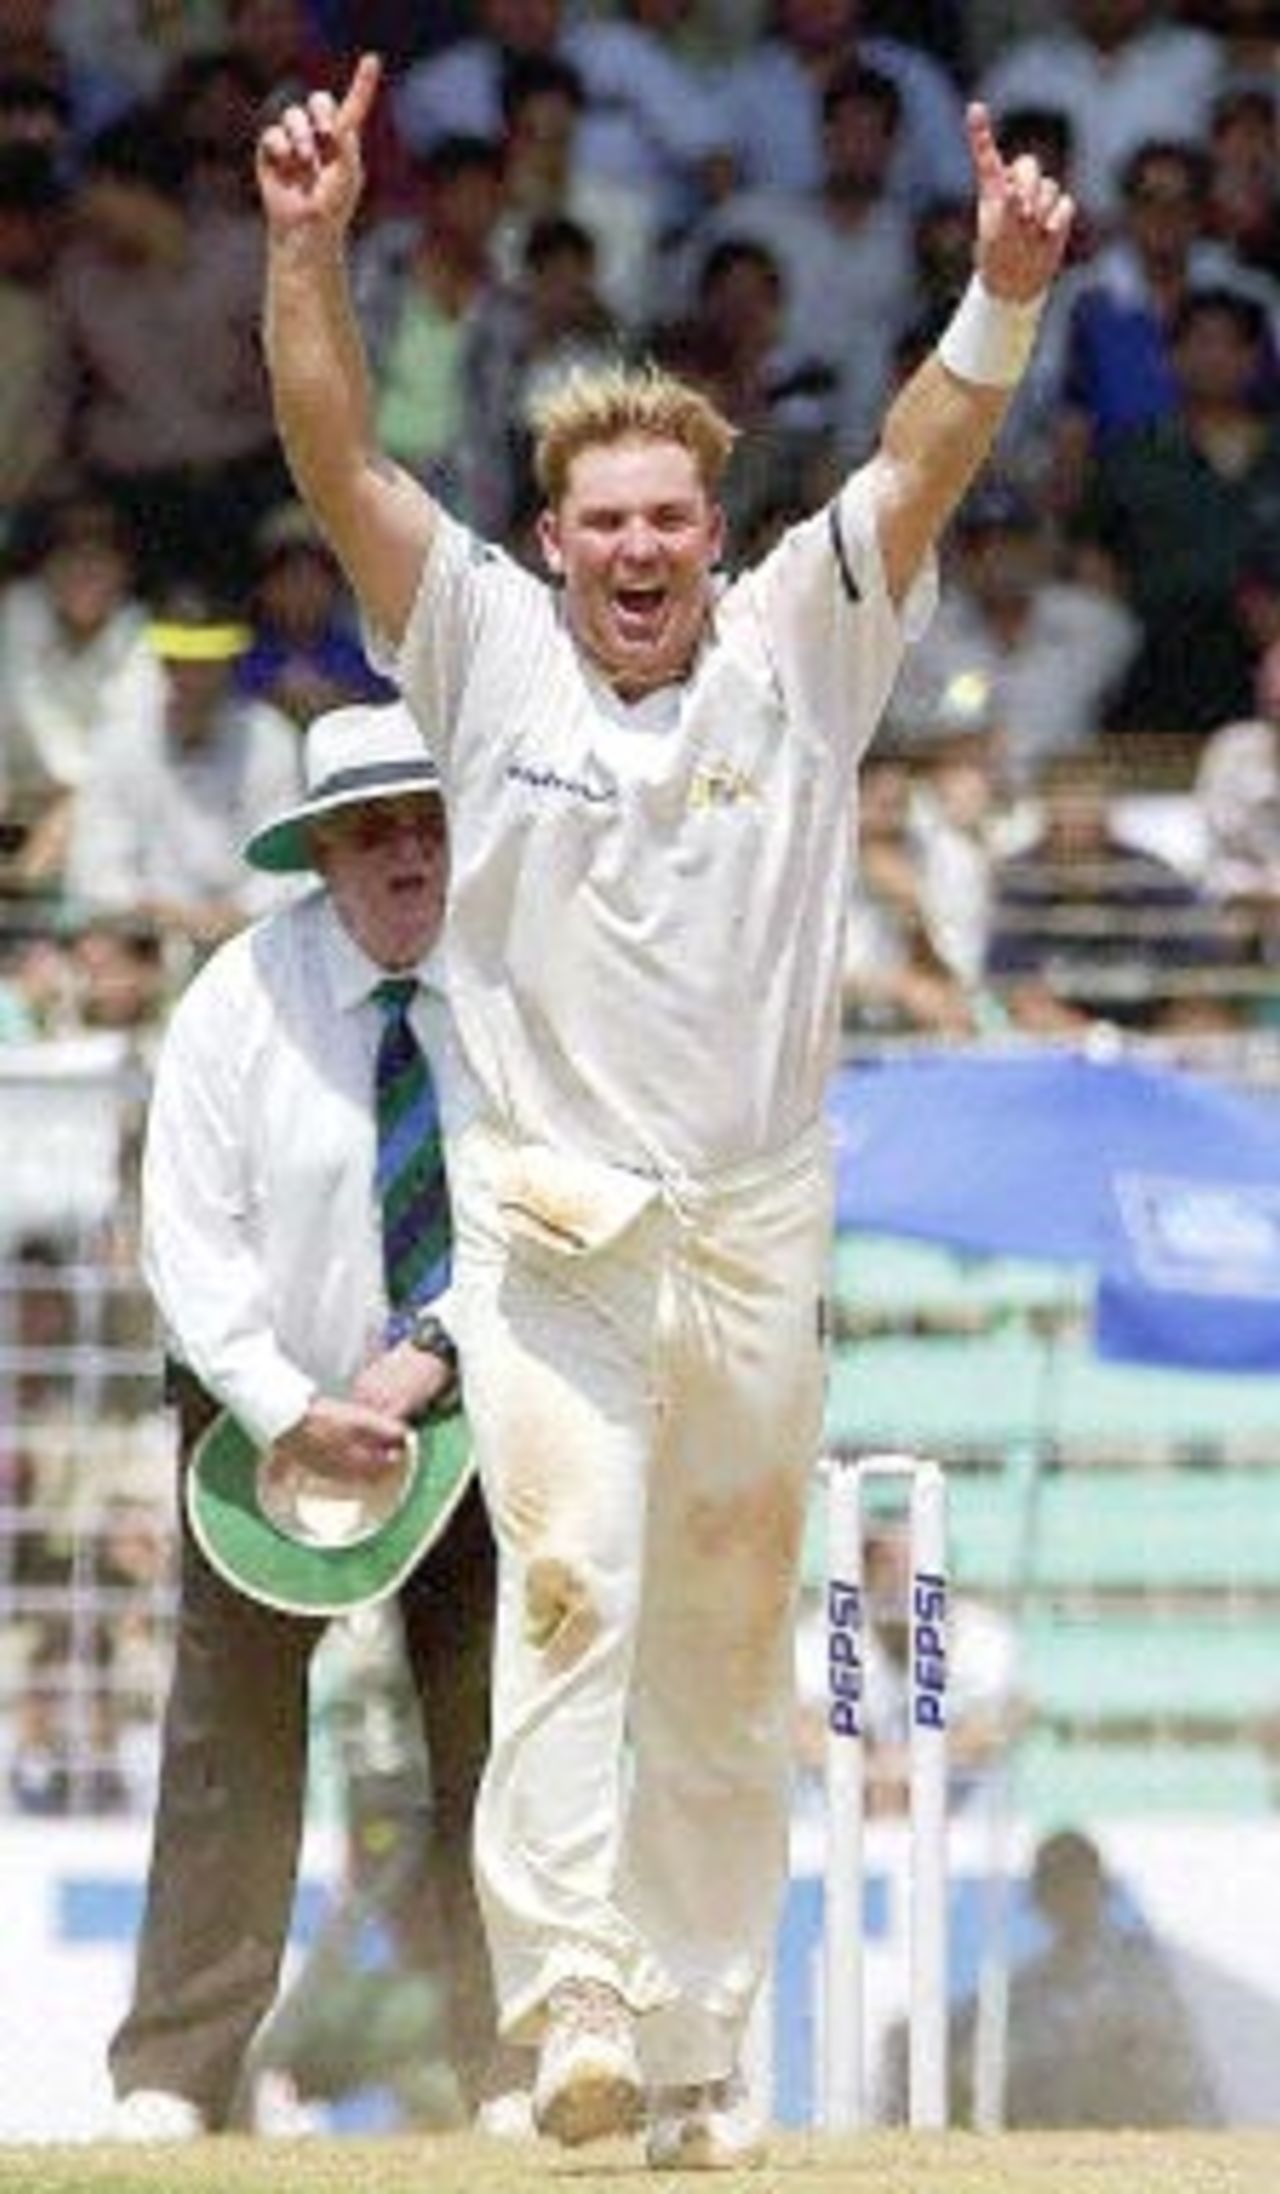 Australian spinner Shane Warne celebrates after taking the wicket of Indian batsman Rahul Dravid (not in picture) as the umpire (behind) looks on during the third day's play of the first Test match between India and Australia at Wankhede stadium in Mumbai 01 March 2001. India were in deep trouble at 202 for 7 by tea and face an almost certain defeat.